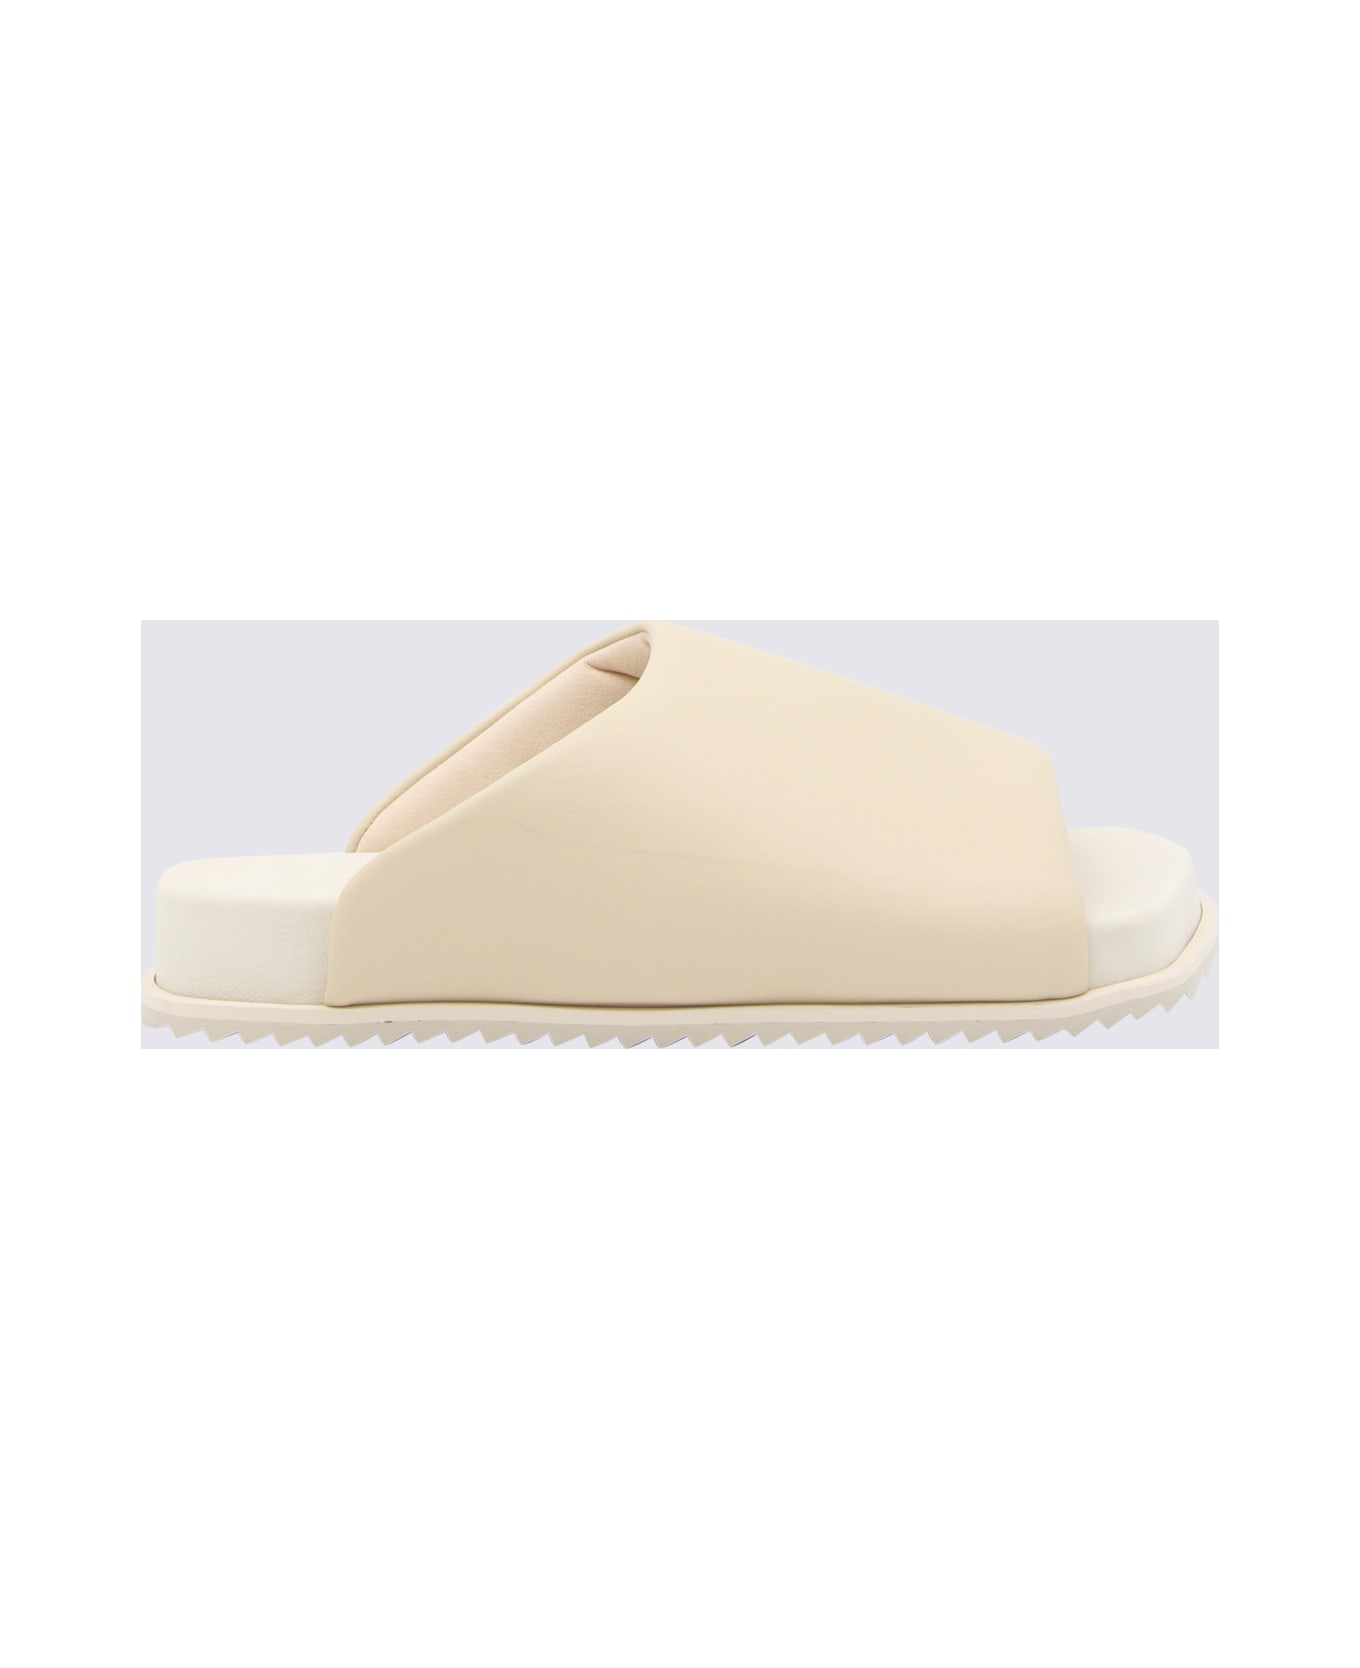 YUME YUME Beige Faux Leather Finn Sider Sandals その他各種シューズ